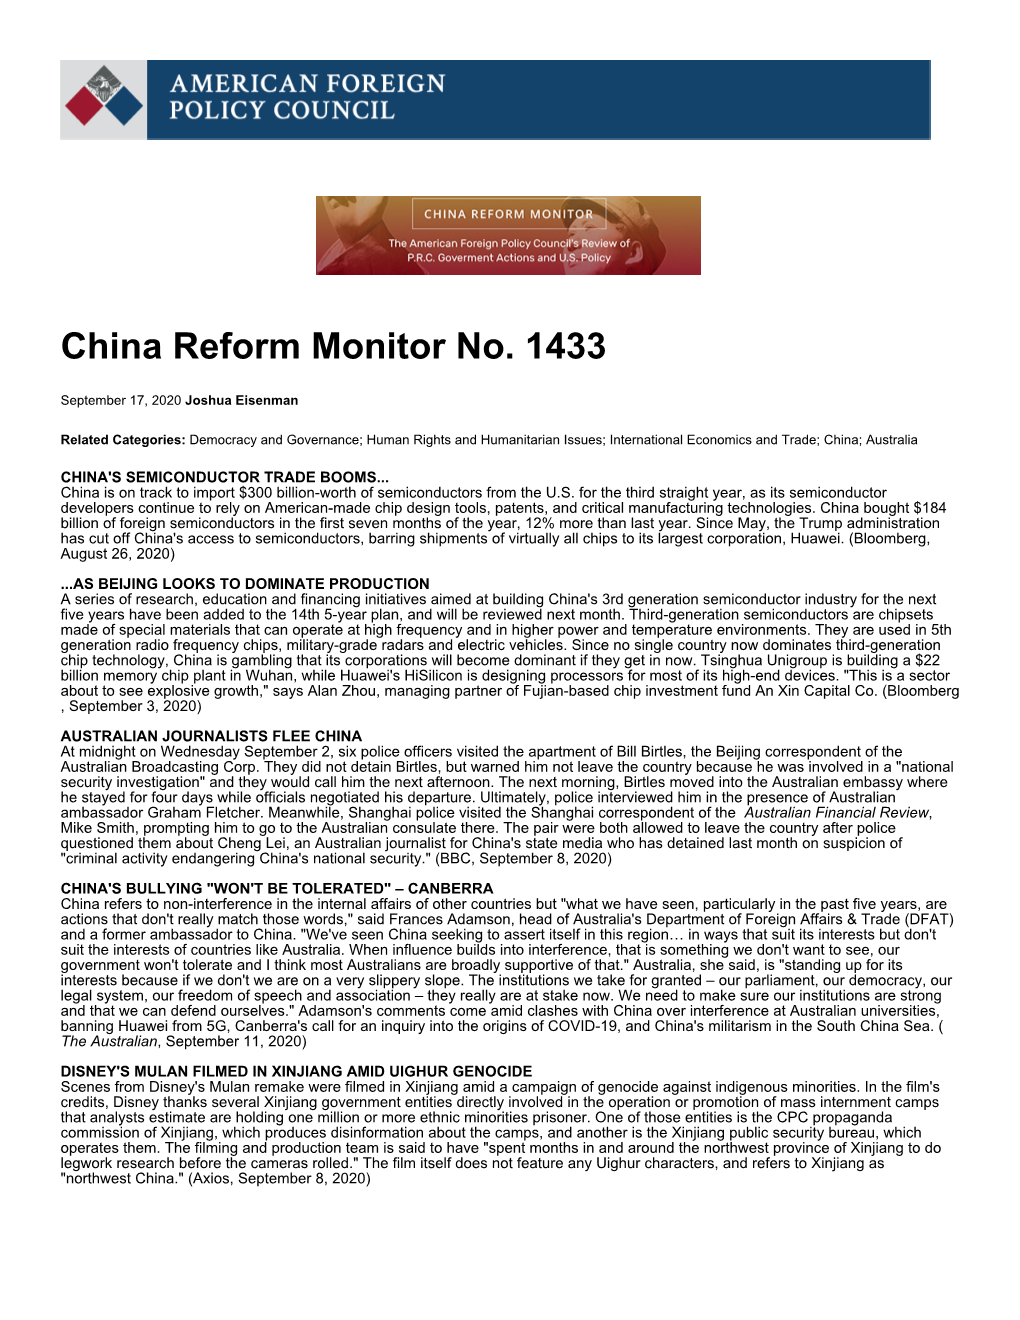 China Reform Monitor No. 1433 | American Foreign Policy Council